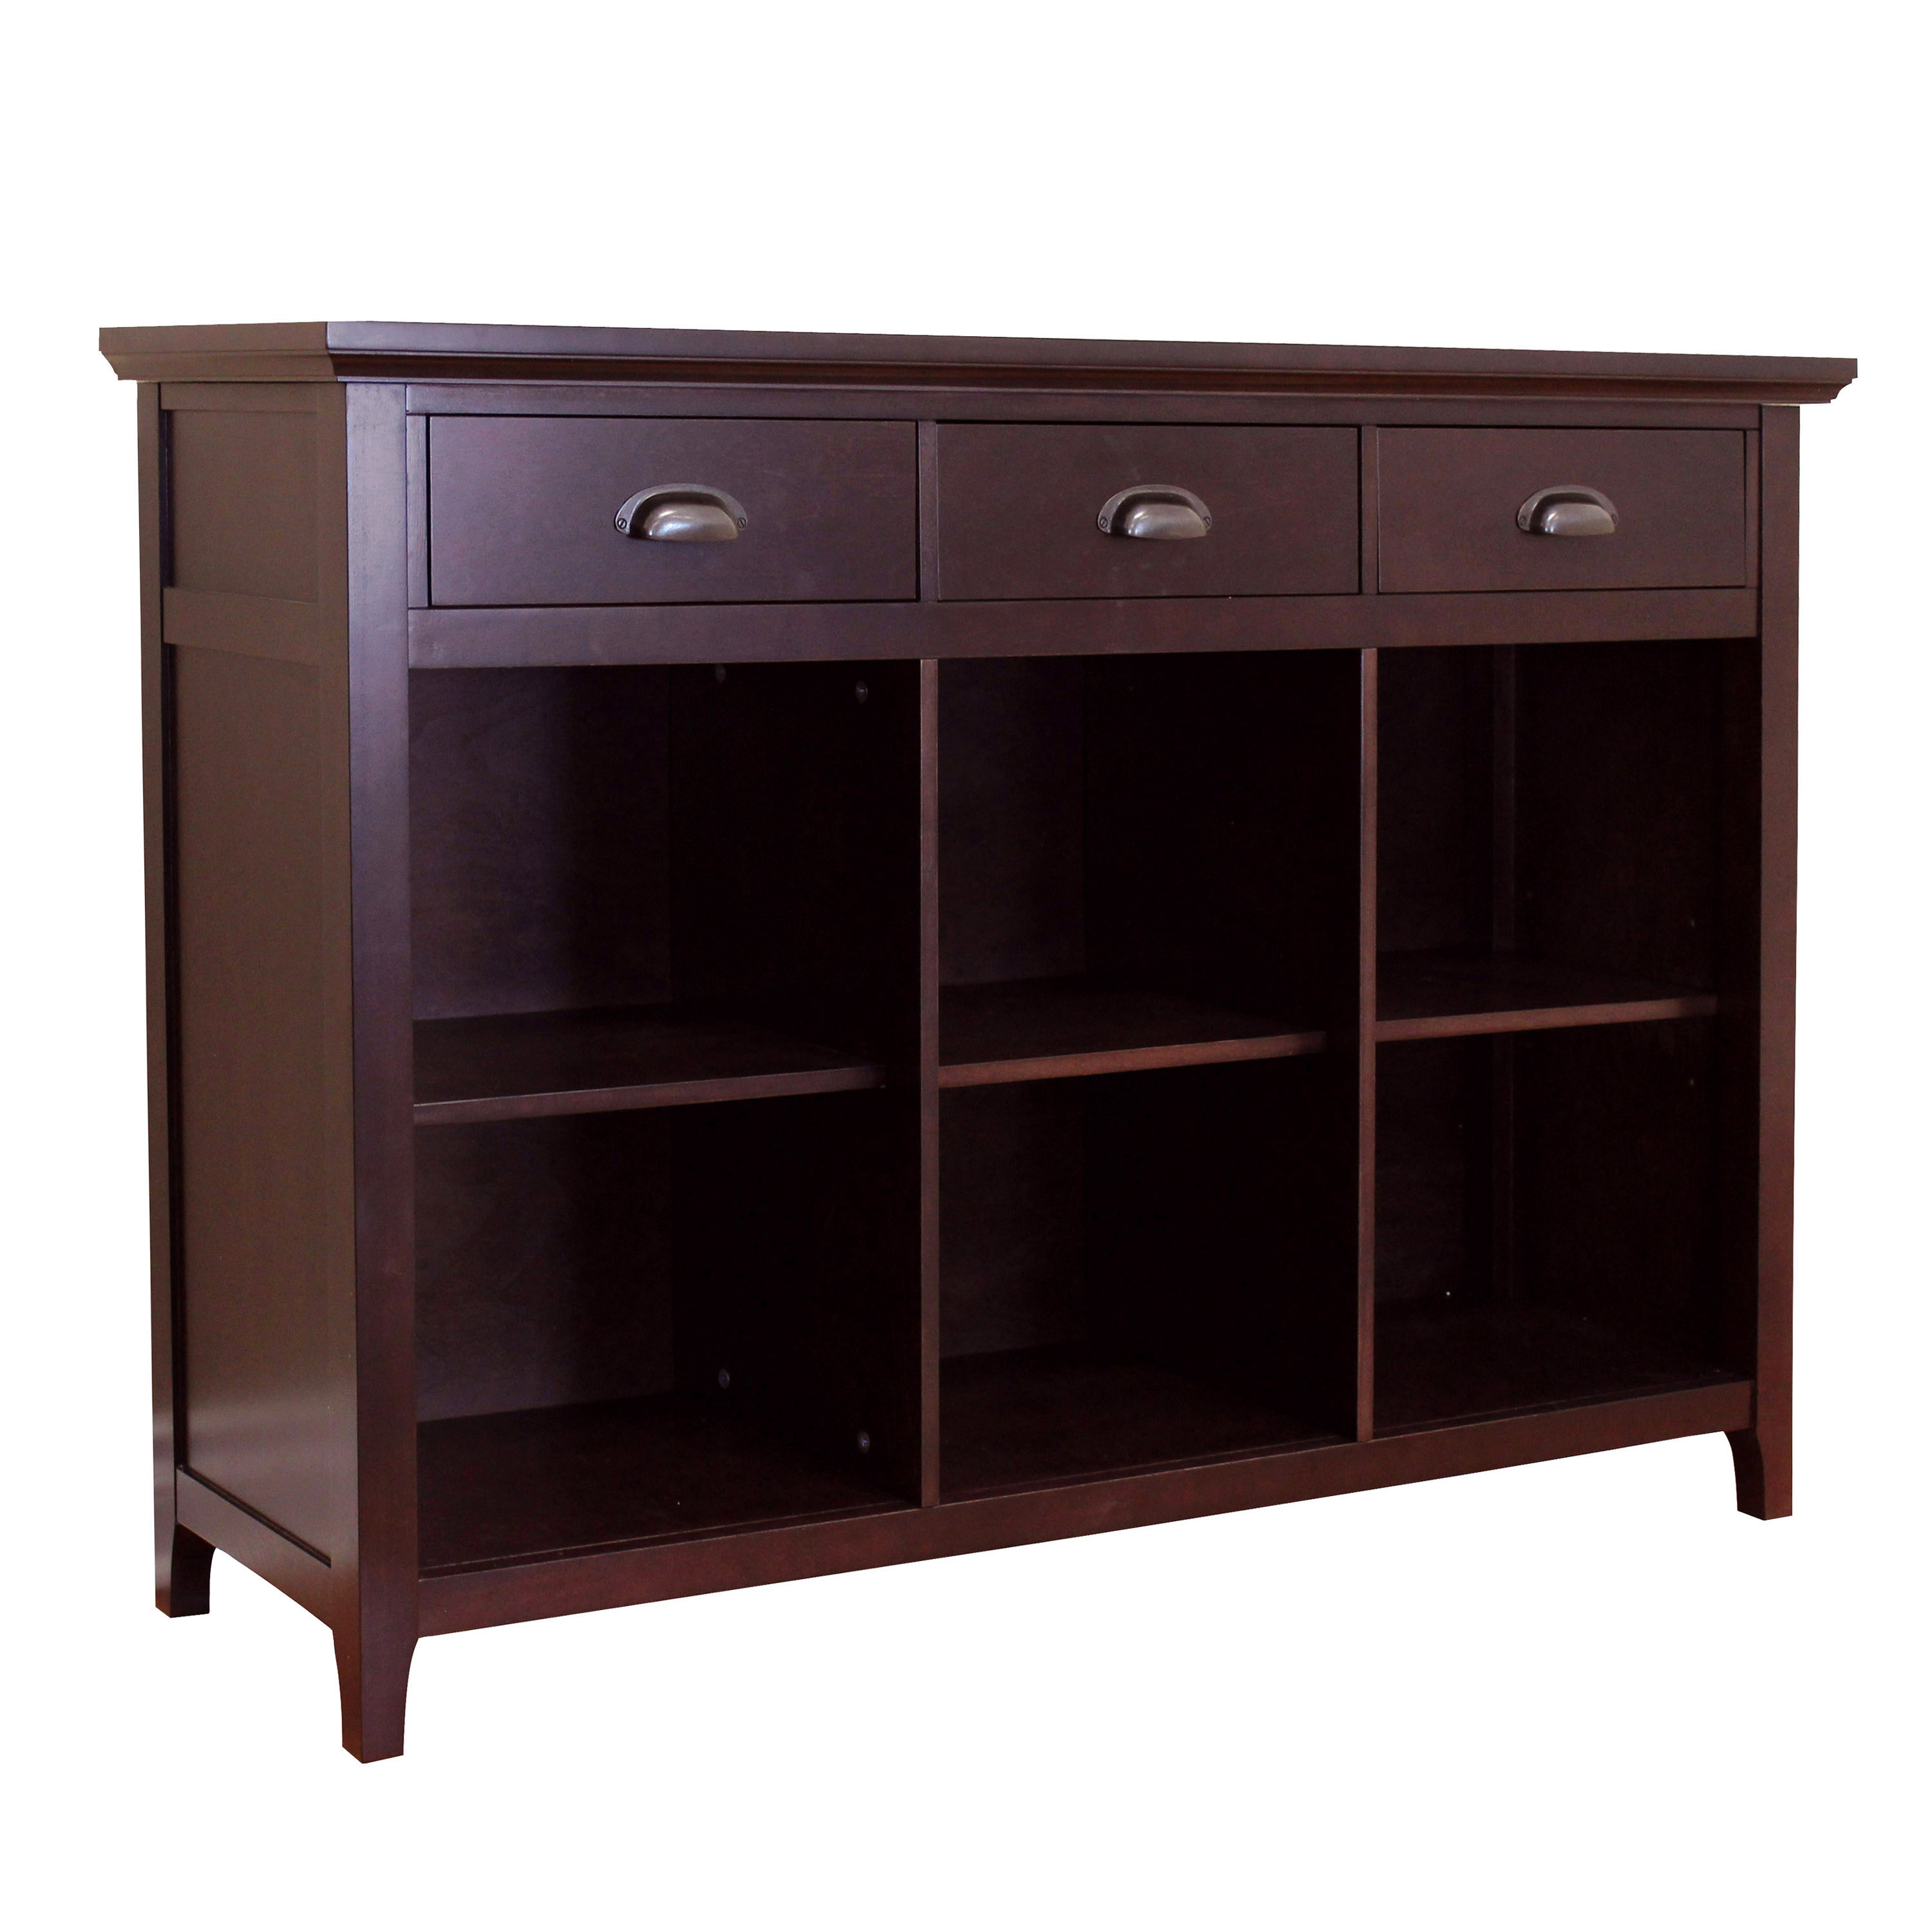 Lindendale 3 Drawers 54" W. bookcase